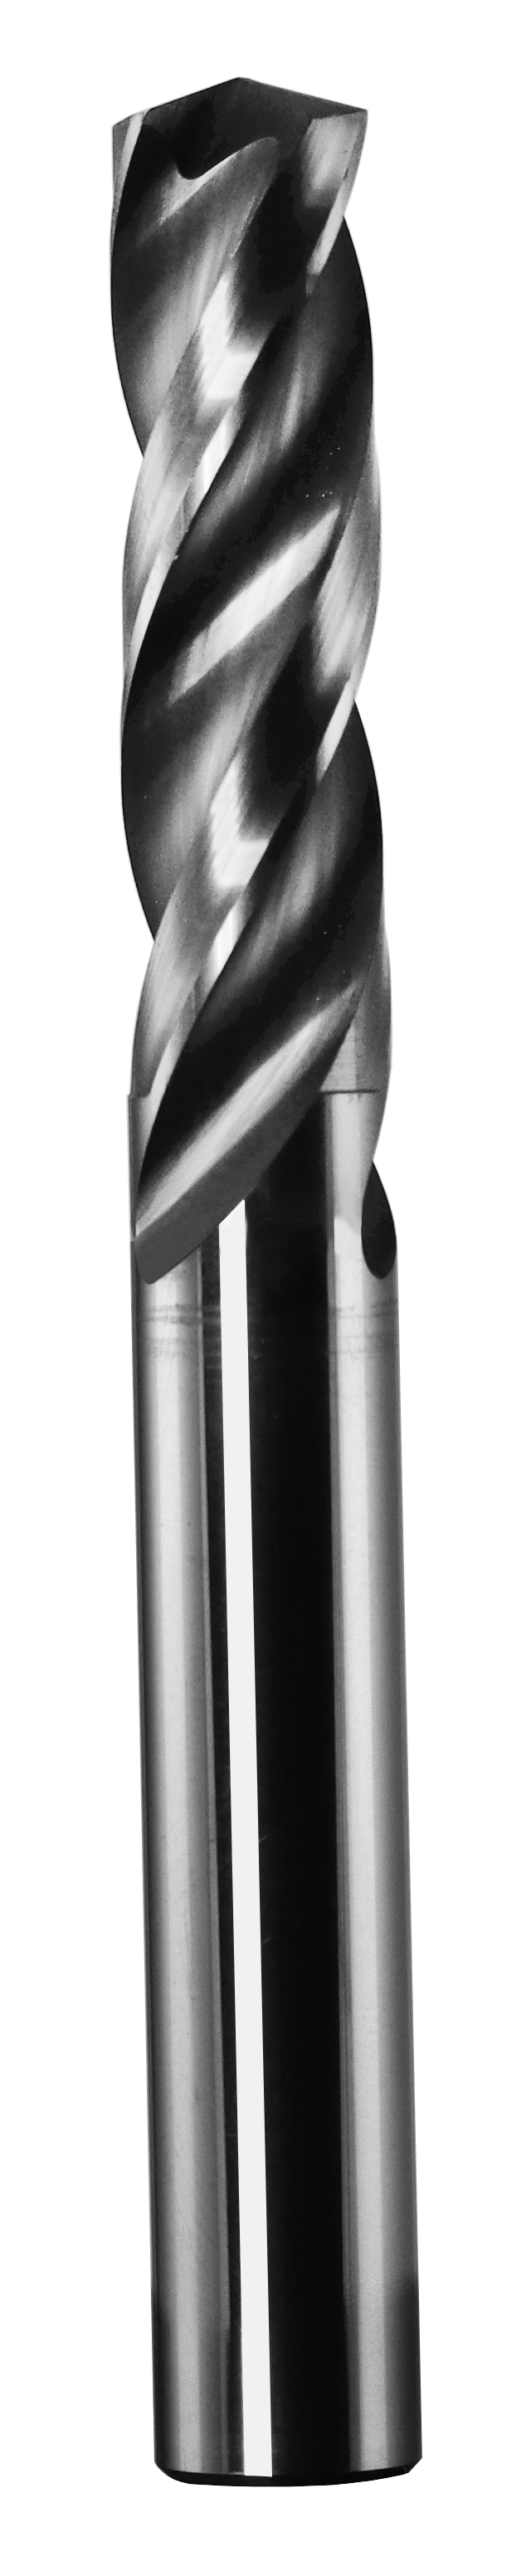 14.30mm Dia, 150 Degree Point, Solid Carbide Drill - 63039